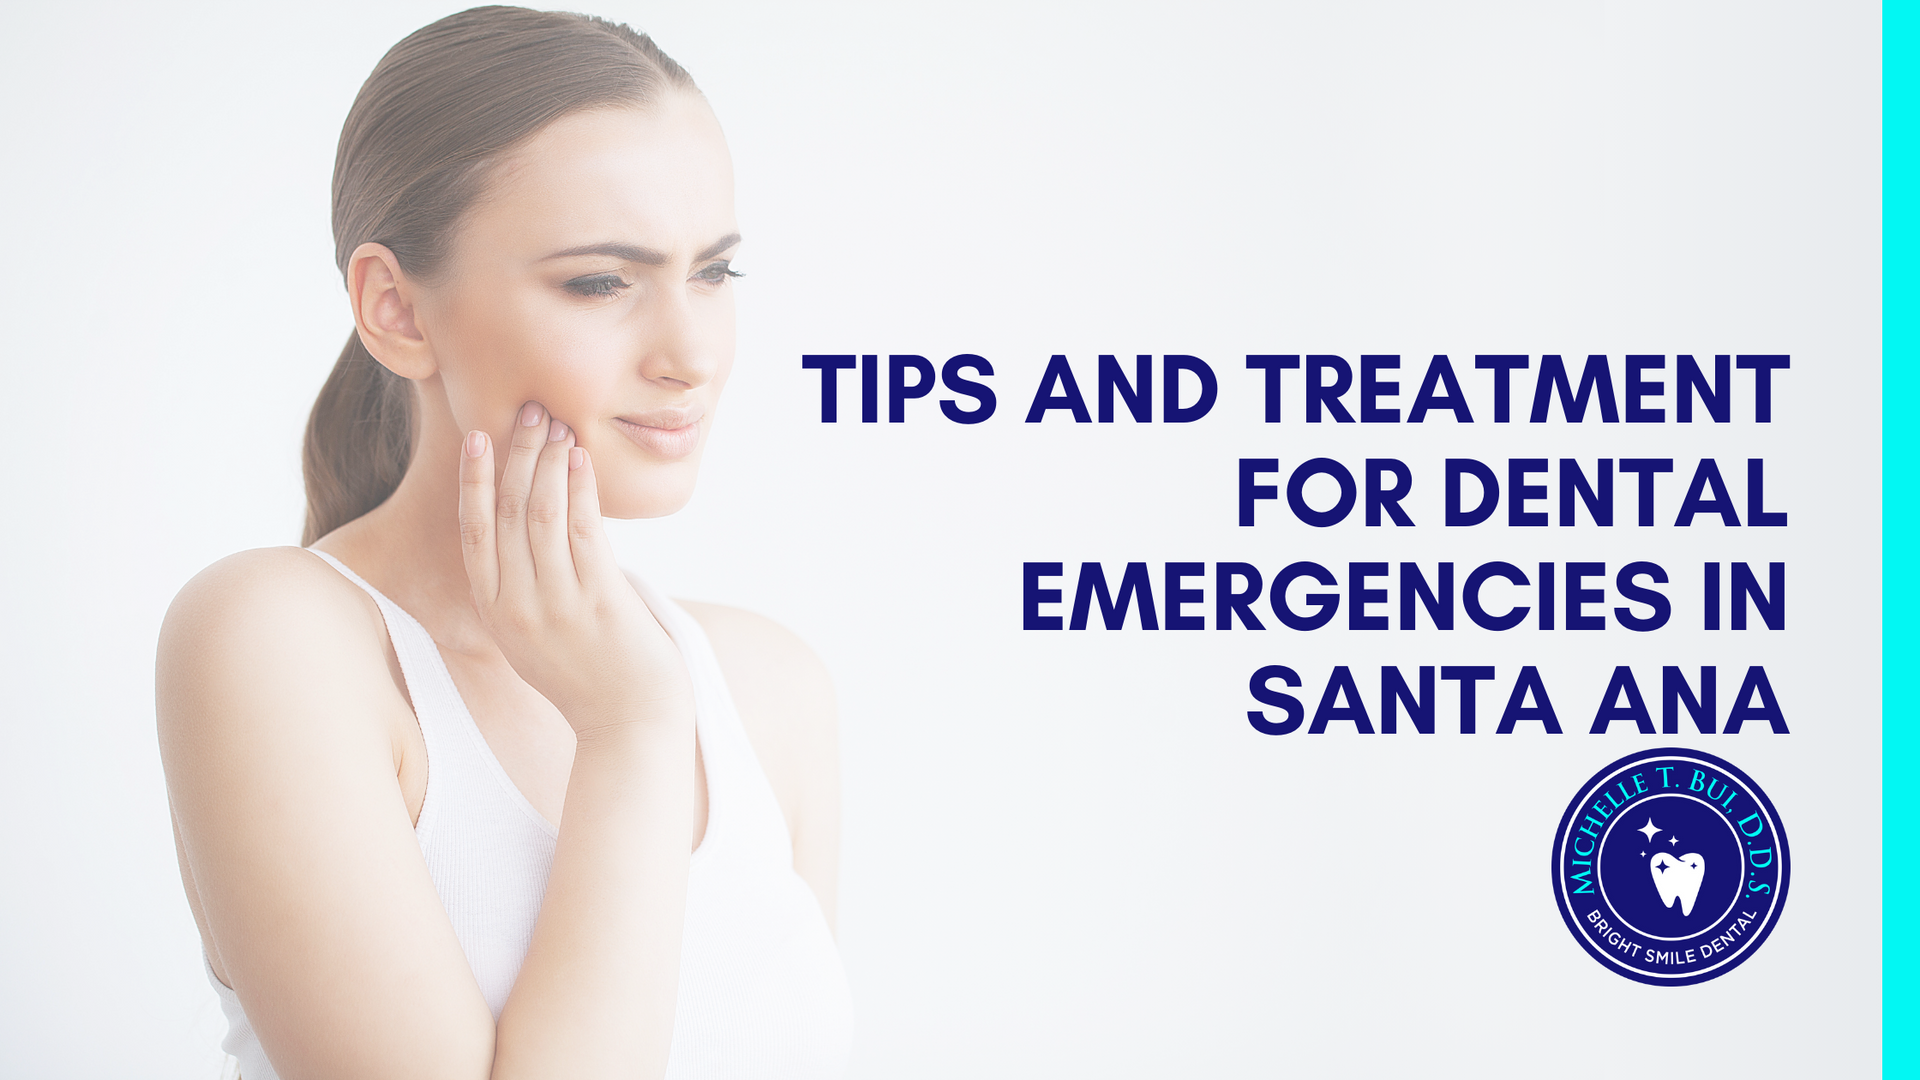 Tips and treatment for dental emergencies in santa ana